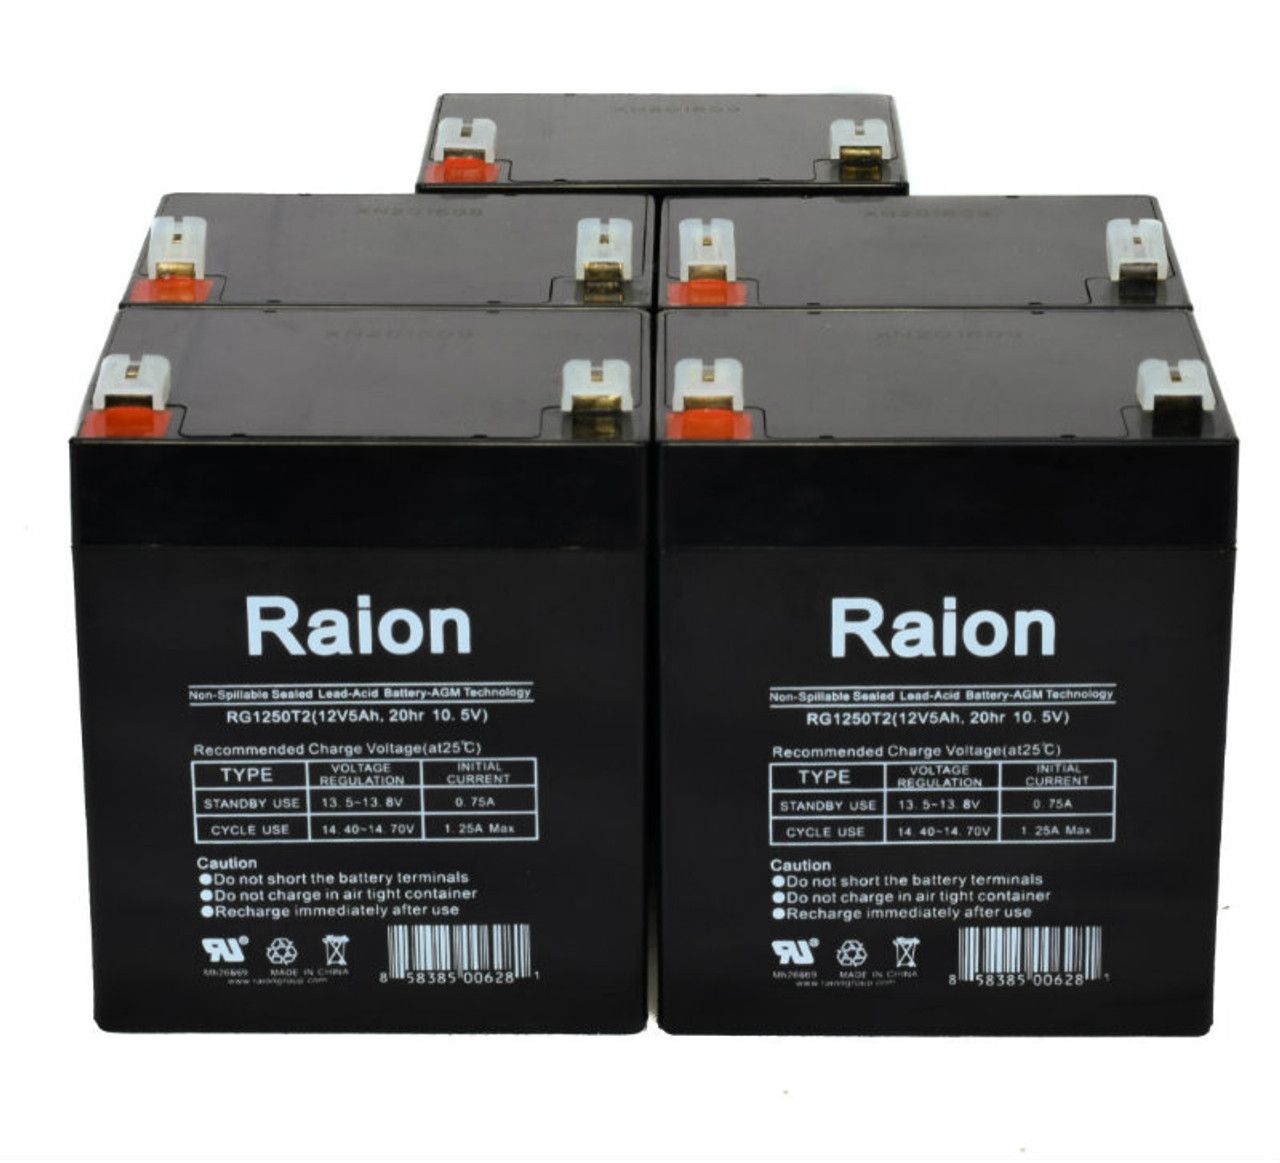 Raion Power RG1250T1 Replacement Fire Alarm Control Panel Battery for Securitron DK25 - 8 Pack